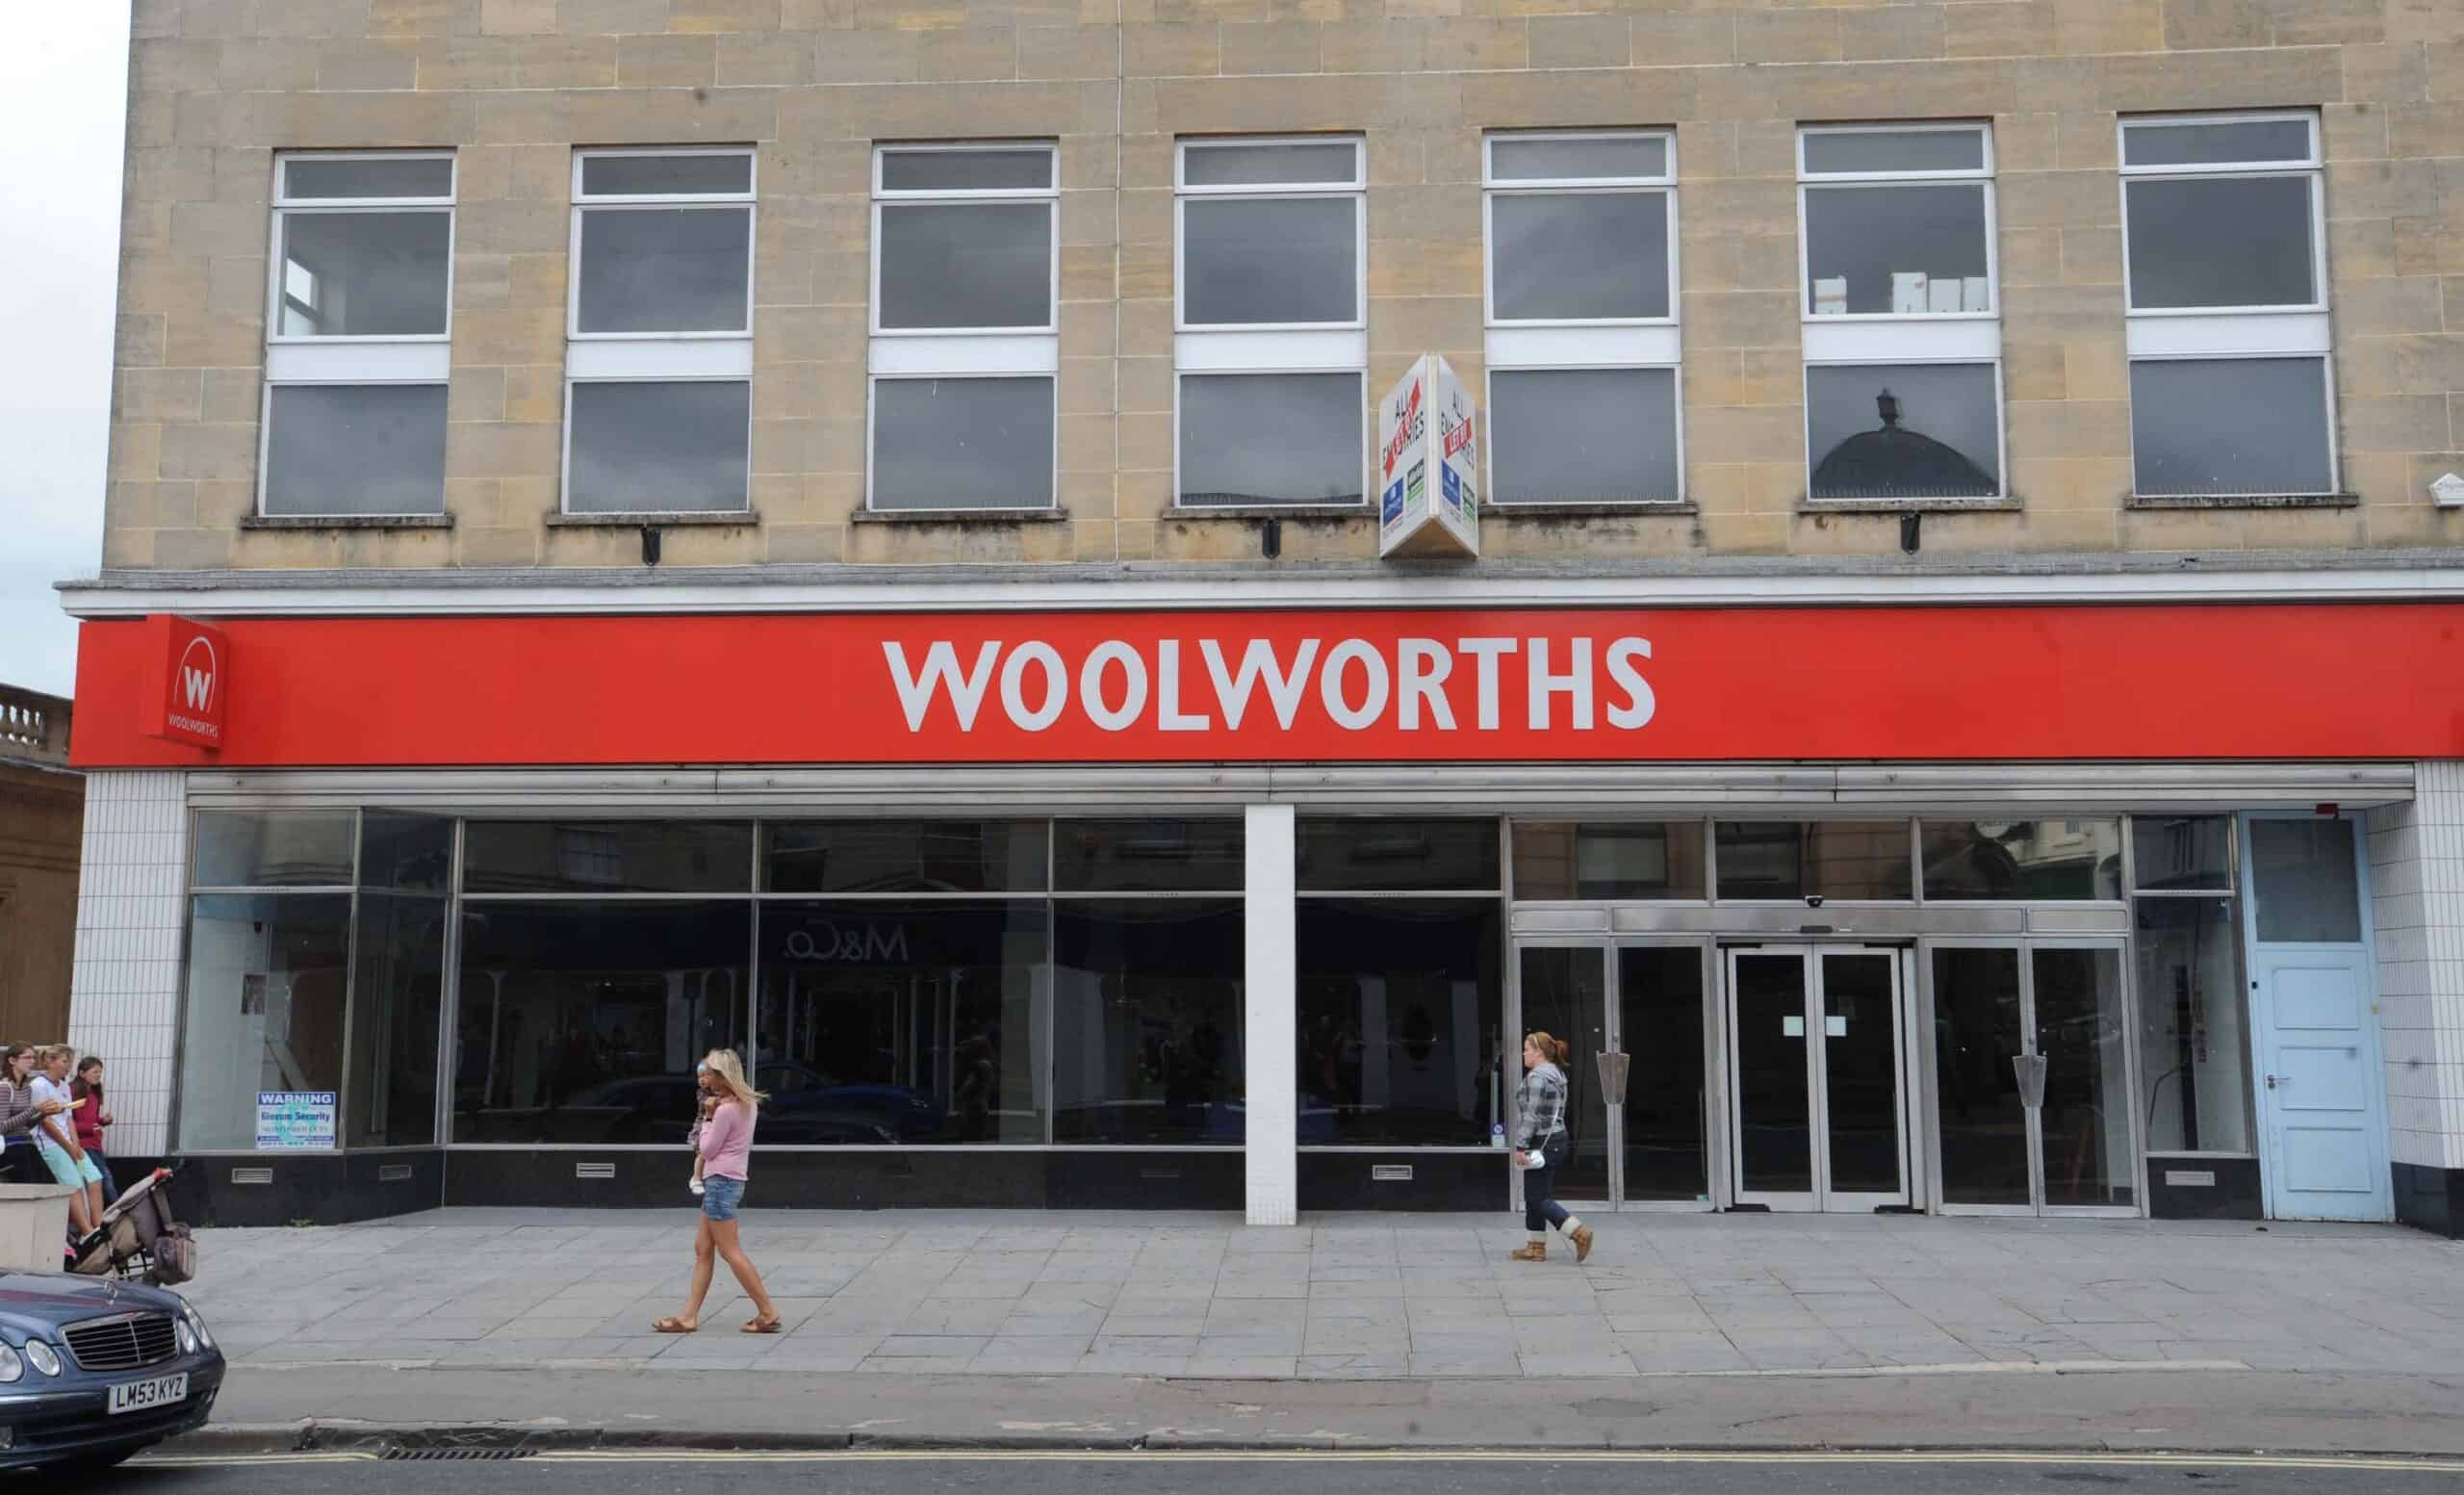 Woolworths ‘set to return’ to UK high street after 15 years